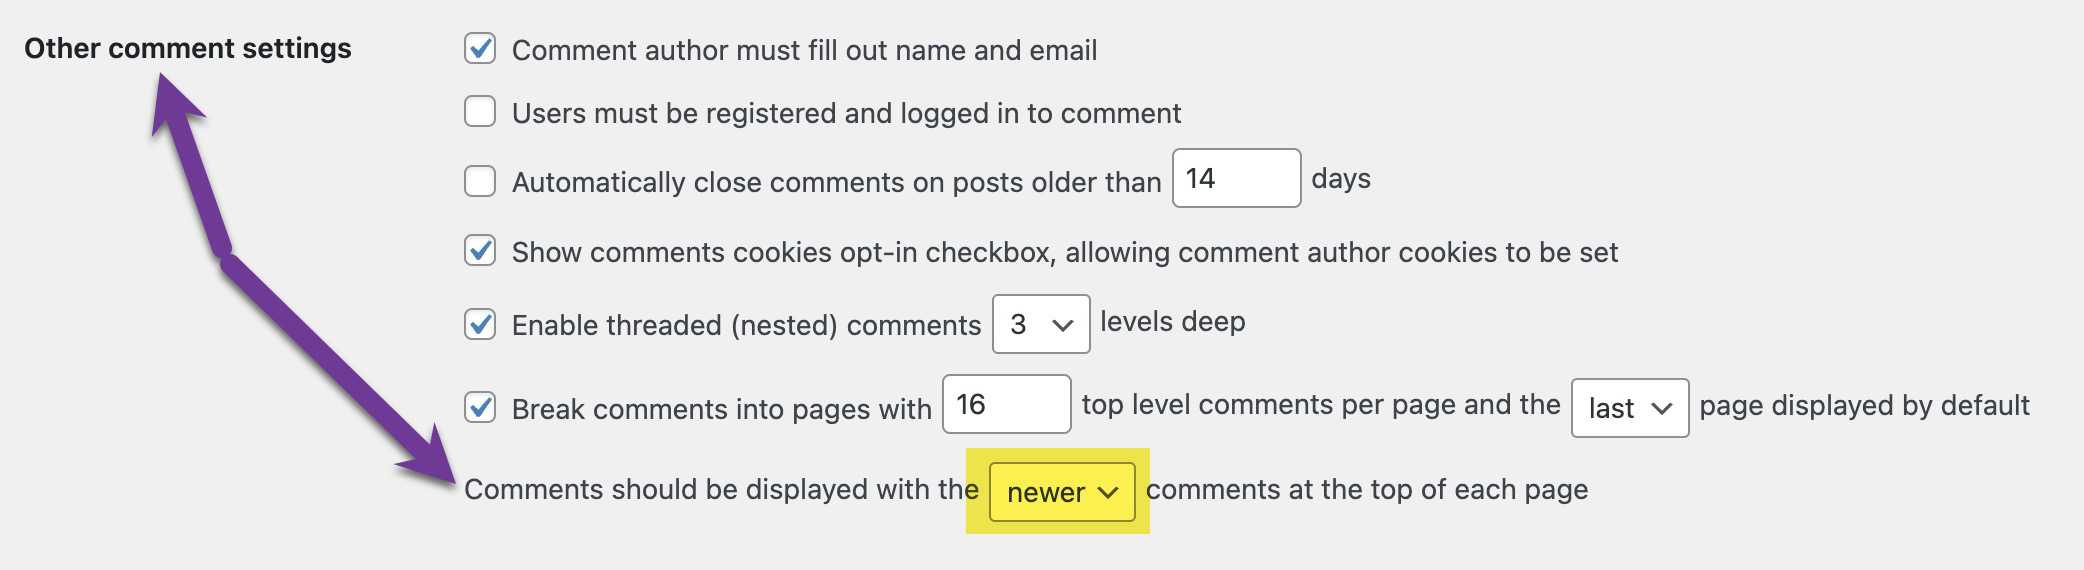 WordPress Other comment settings under the Discussion settings set so comments should be displayed with the newer comments at the top of the page.